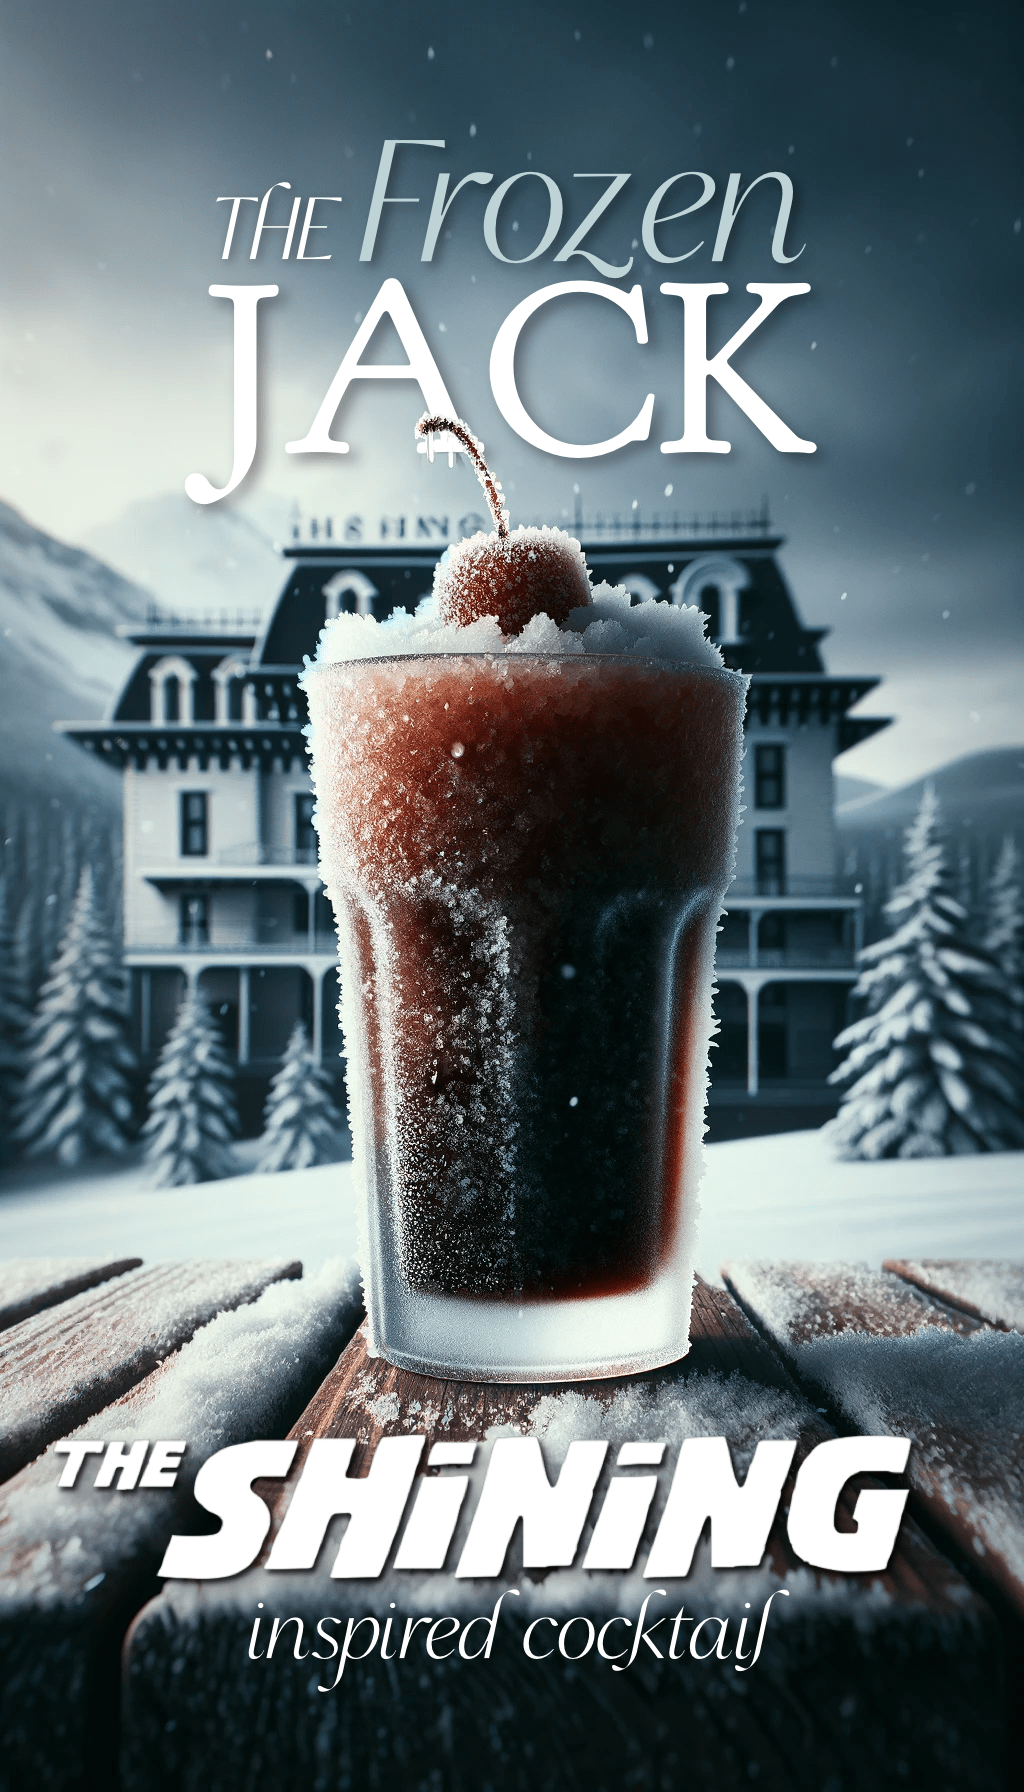 the frozen jack horror movie cocktail inspired by the shining